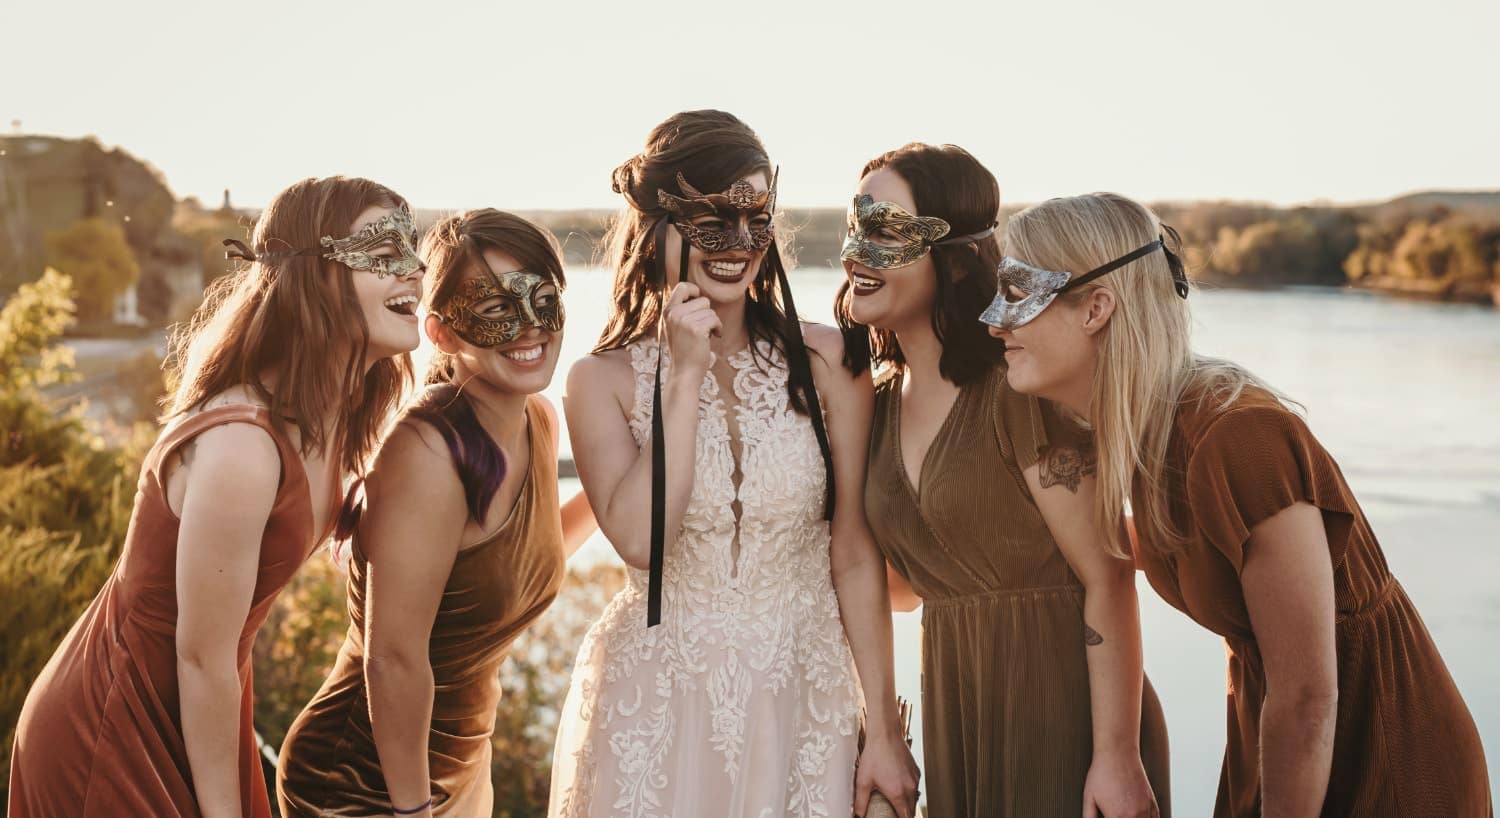 Lady in white dress and other ladies in fall color dresses wearing masquerade masks with a river in the background